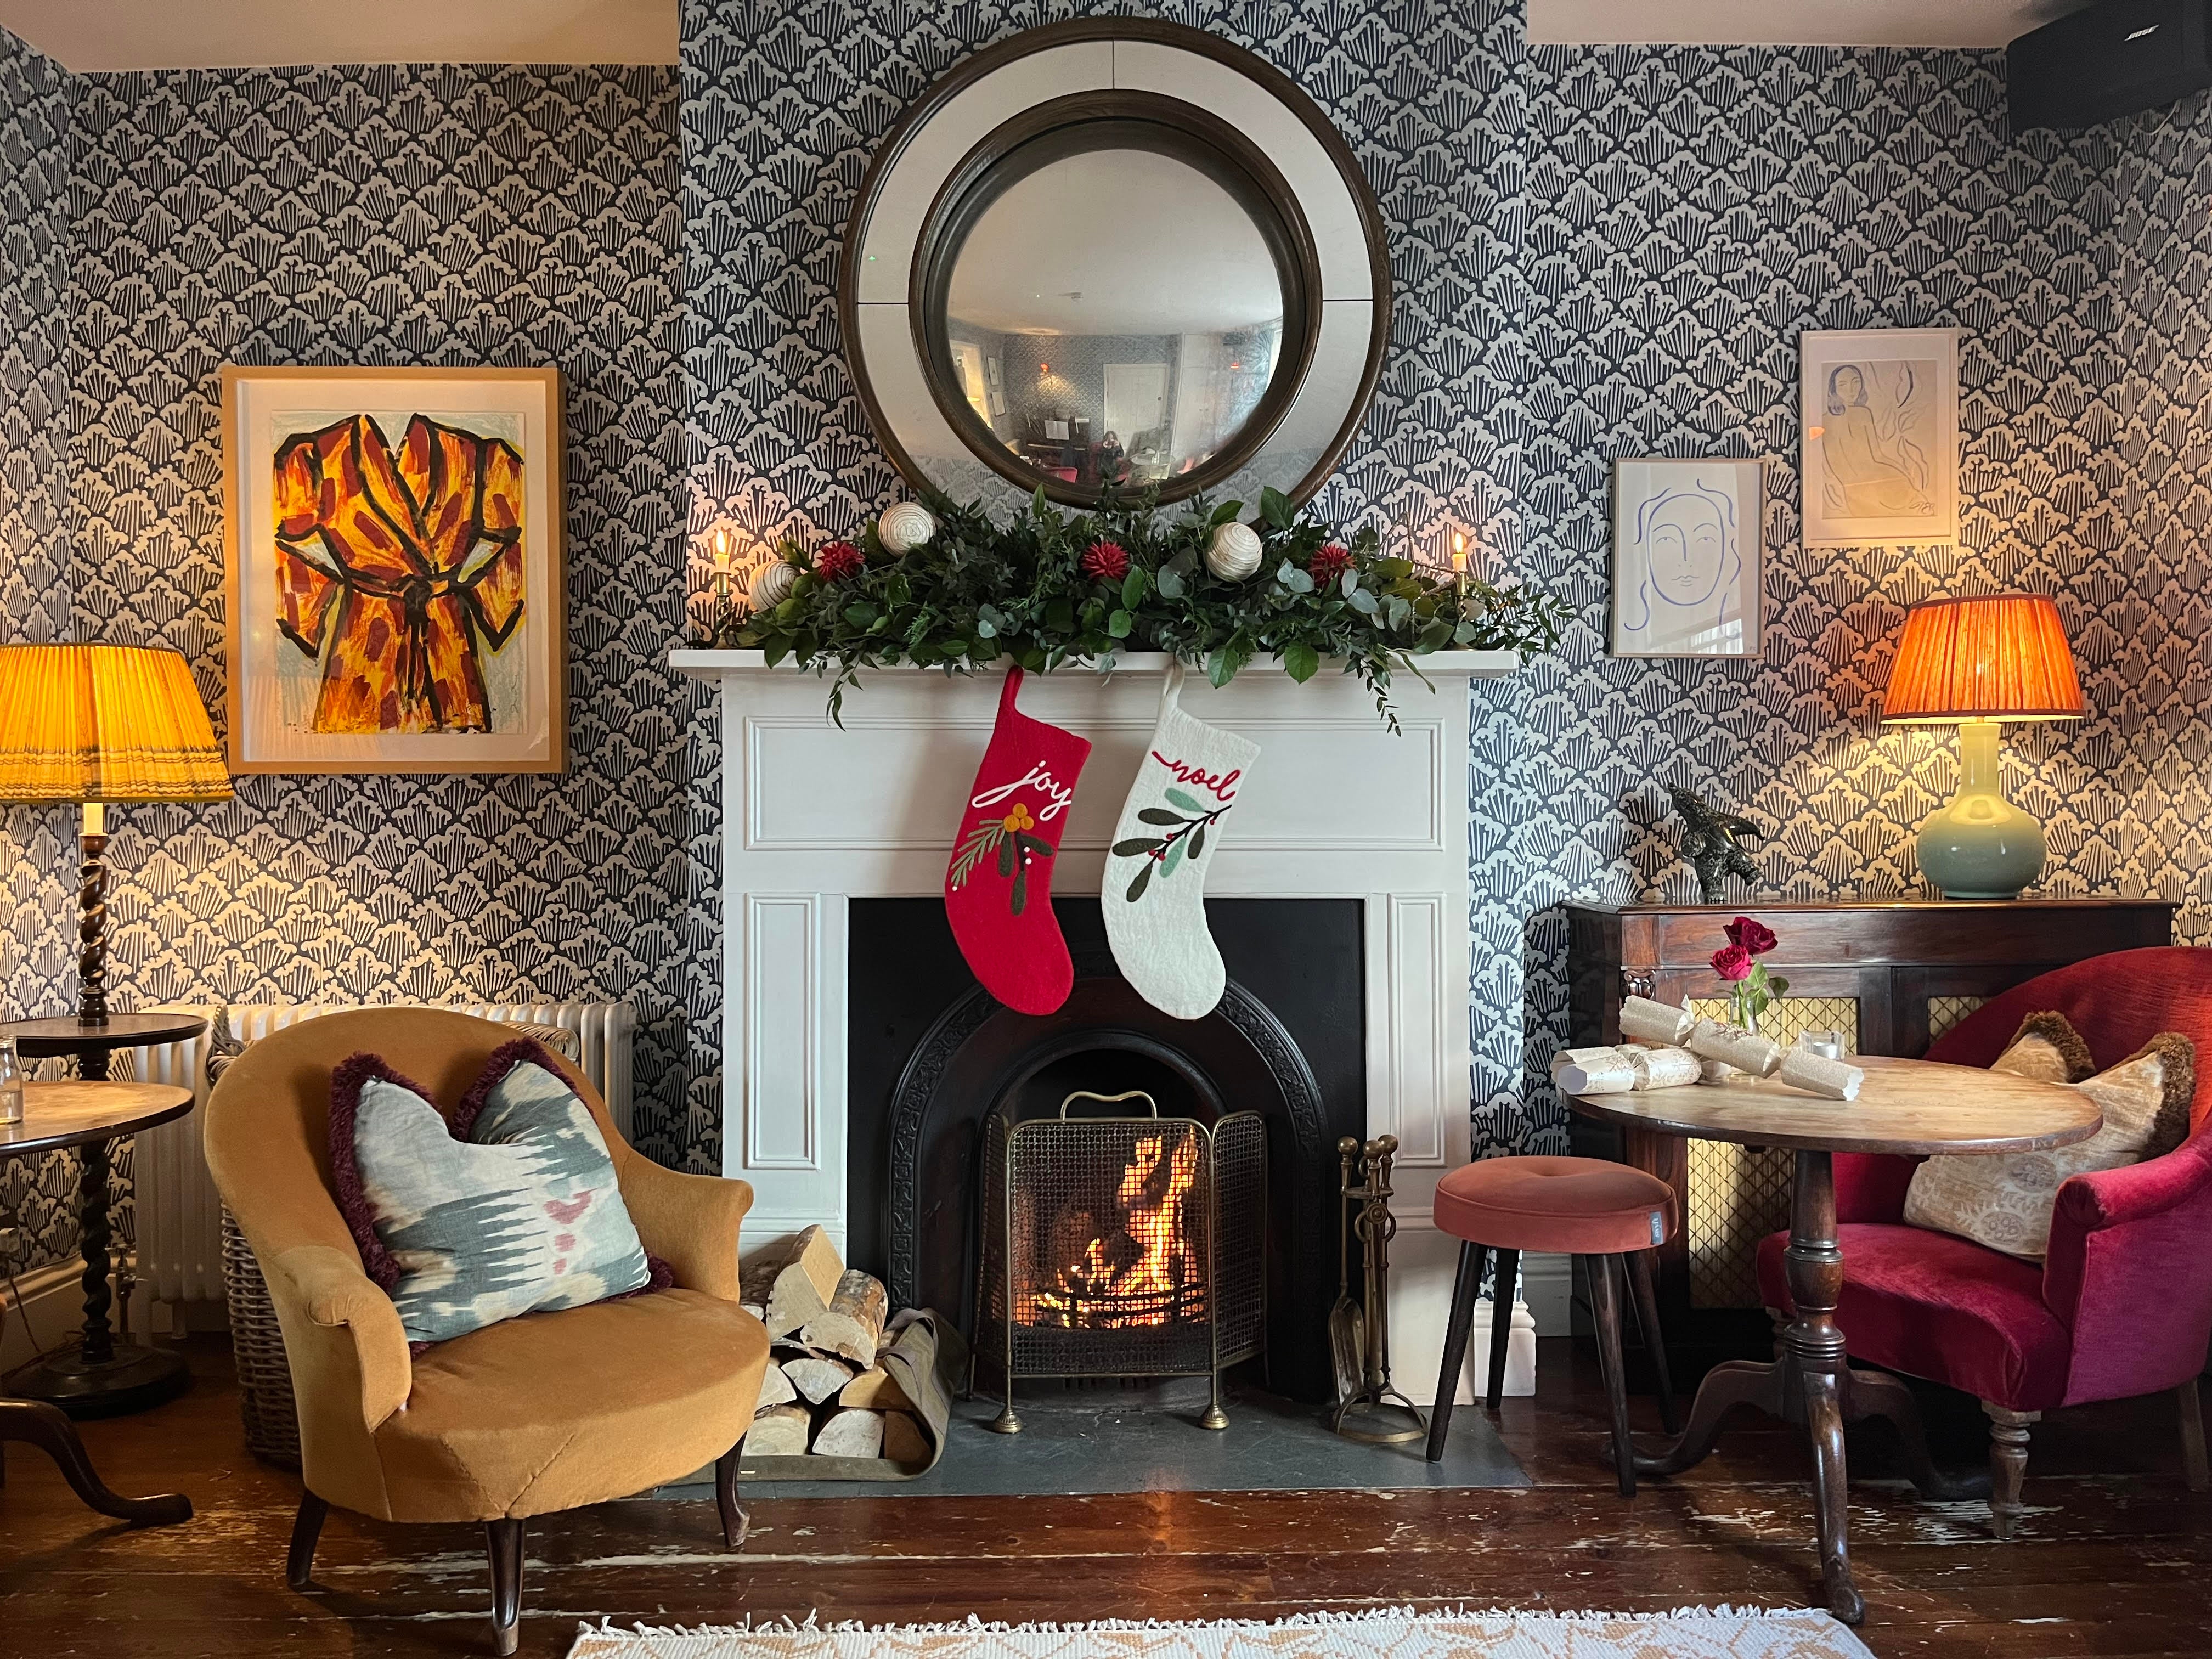 For a festive itinerary complete with a hot chocolate bar, hunker down at Foresters Hall